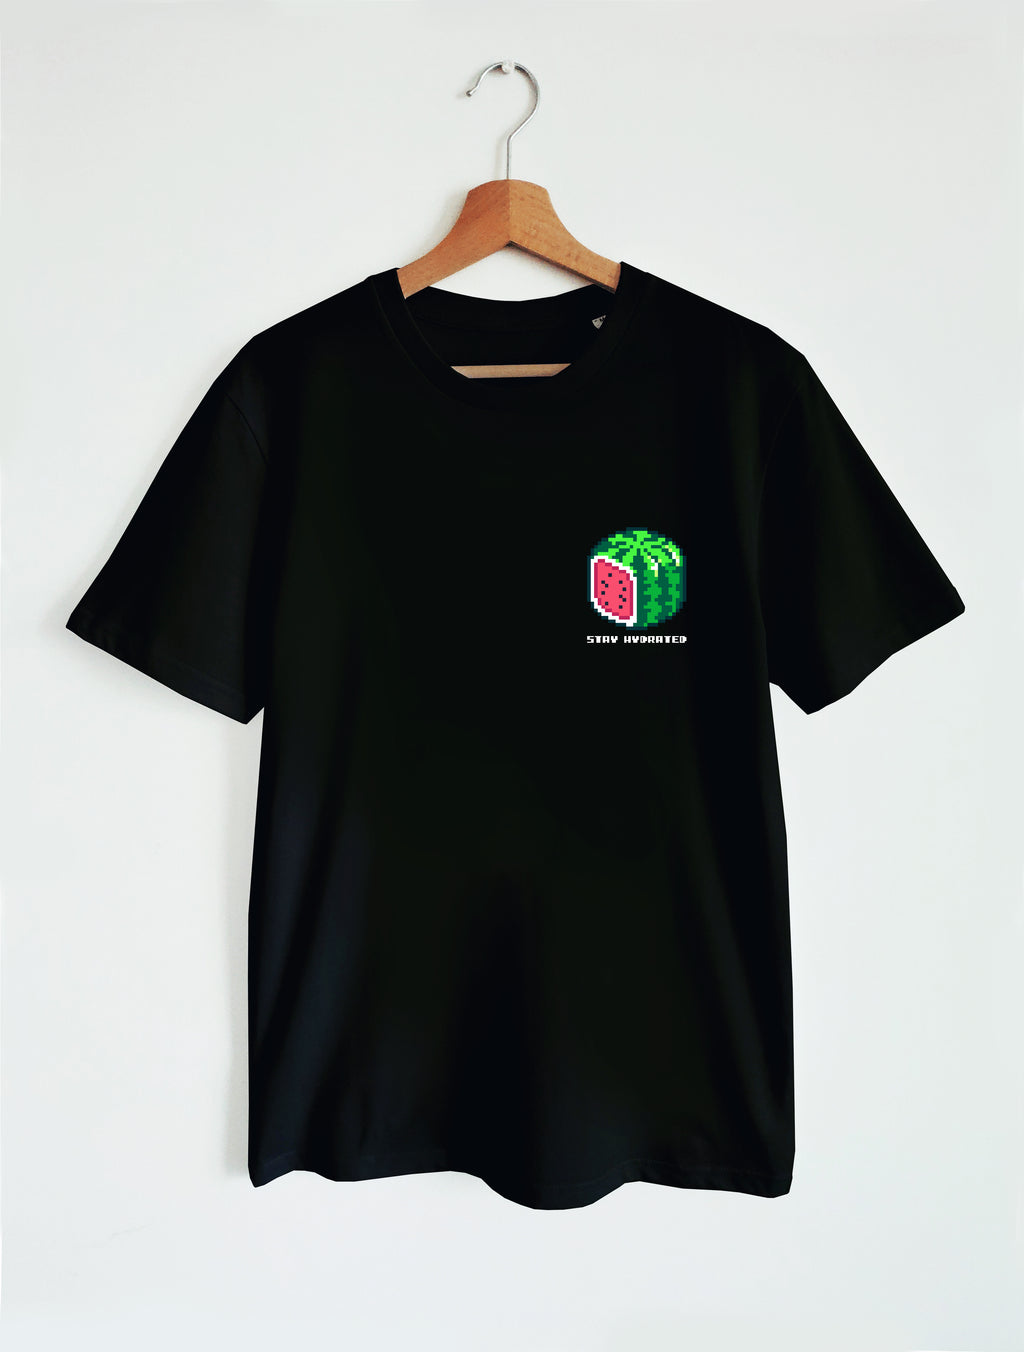 UNISEX T-SHIRT / WATERMELON “STAY HYDRATED”